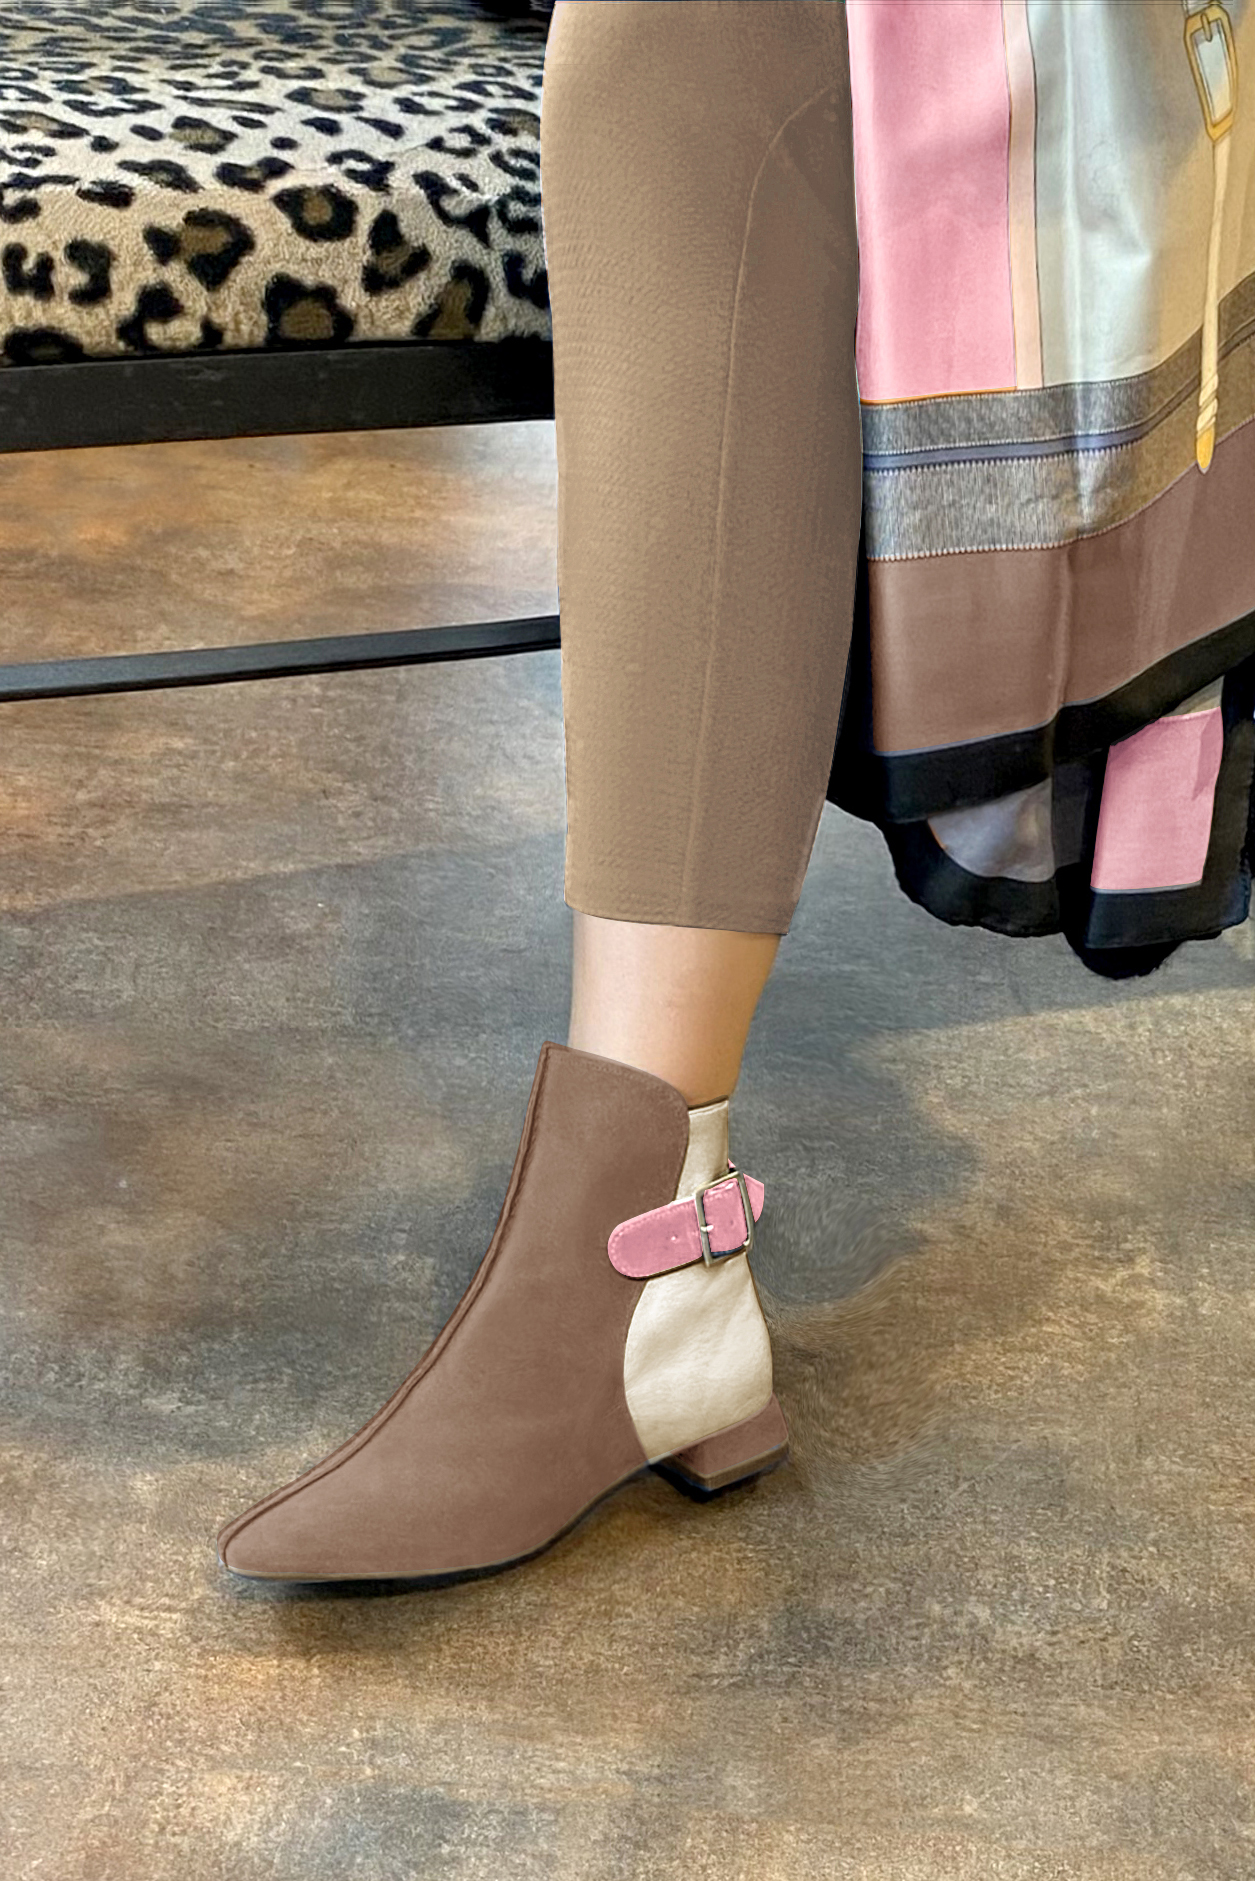 Biscuit beige, gold and carnation pink women's ankle boots with buckles at the back. Square toe. Flat flare heels. Worn view - Florence KOOIJMAN